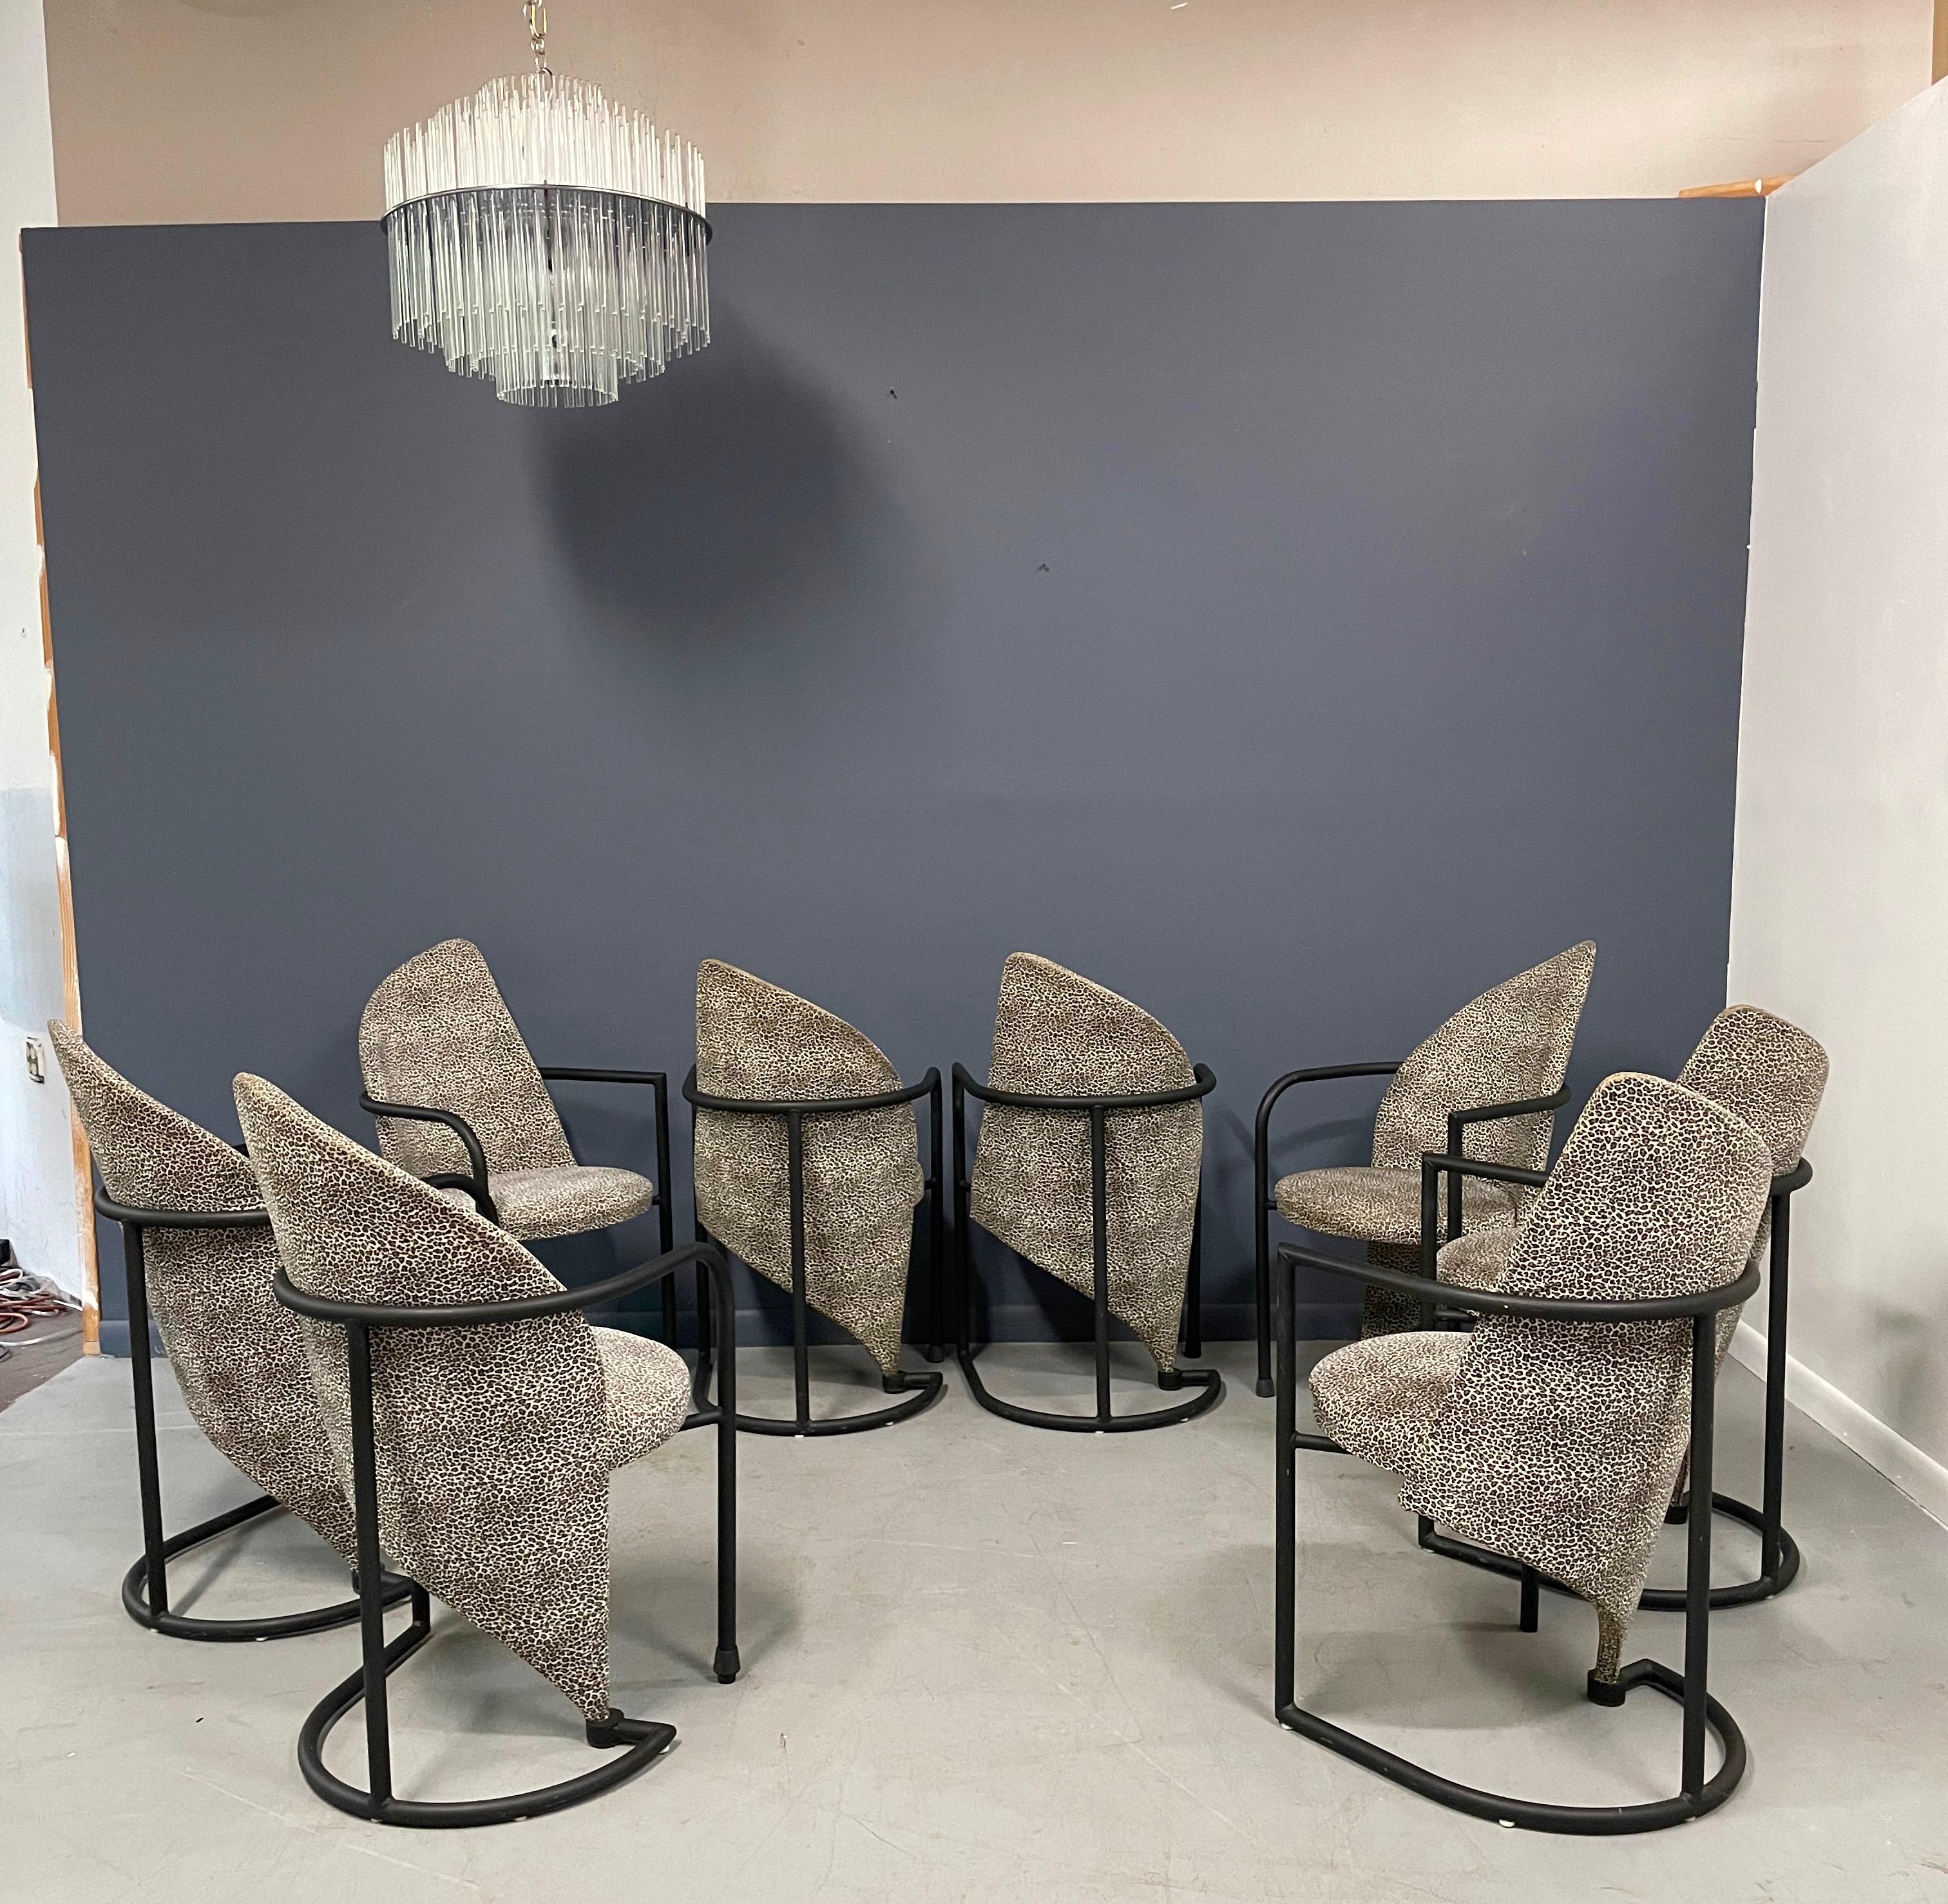 North American Post Modern Set of Eight Dining Chairs in Iron and Cheetah Print by Cal Style